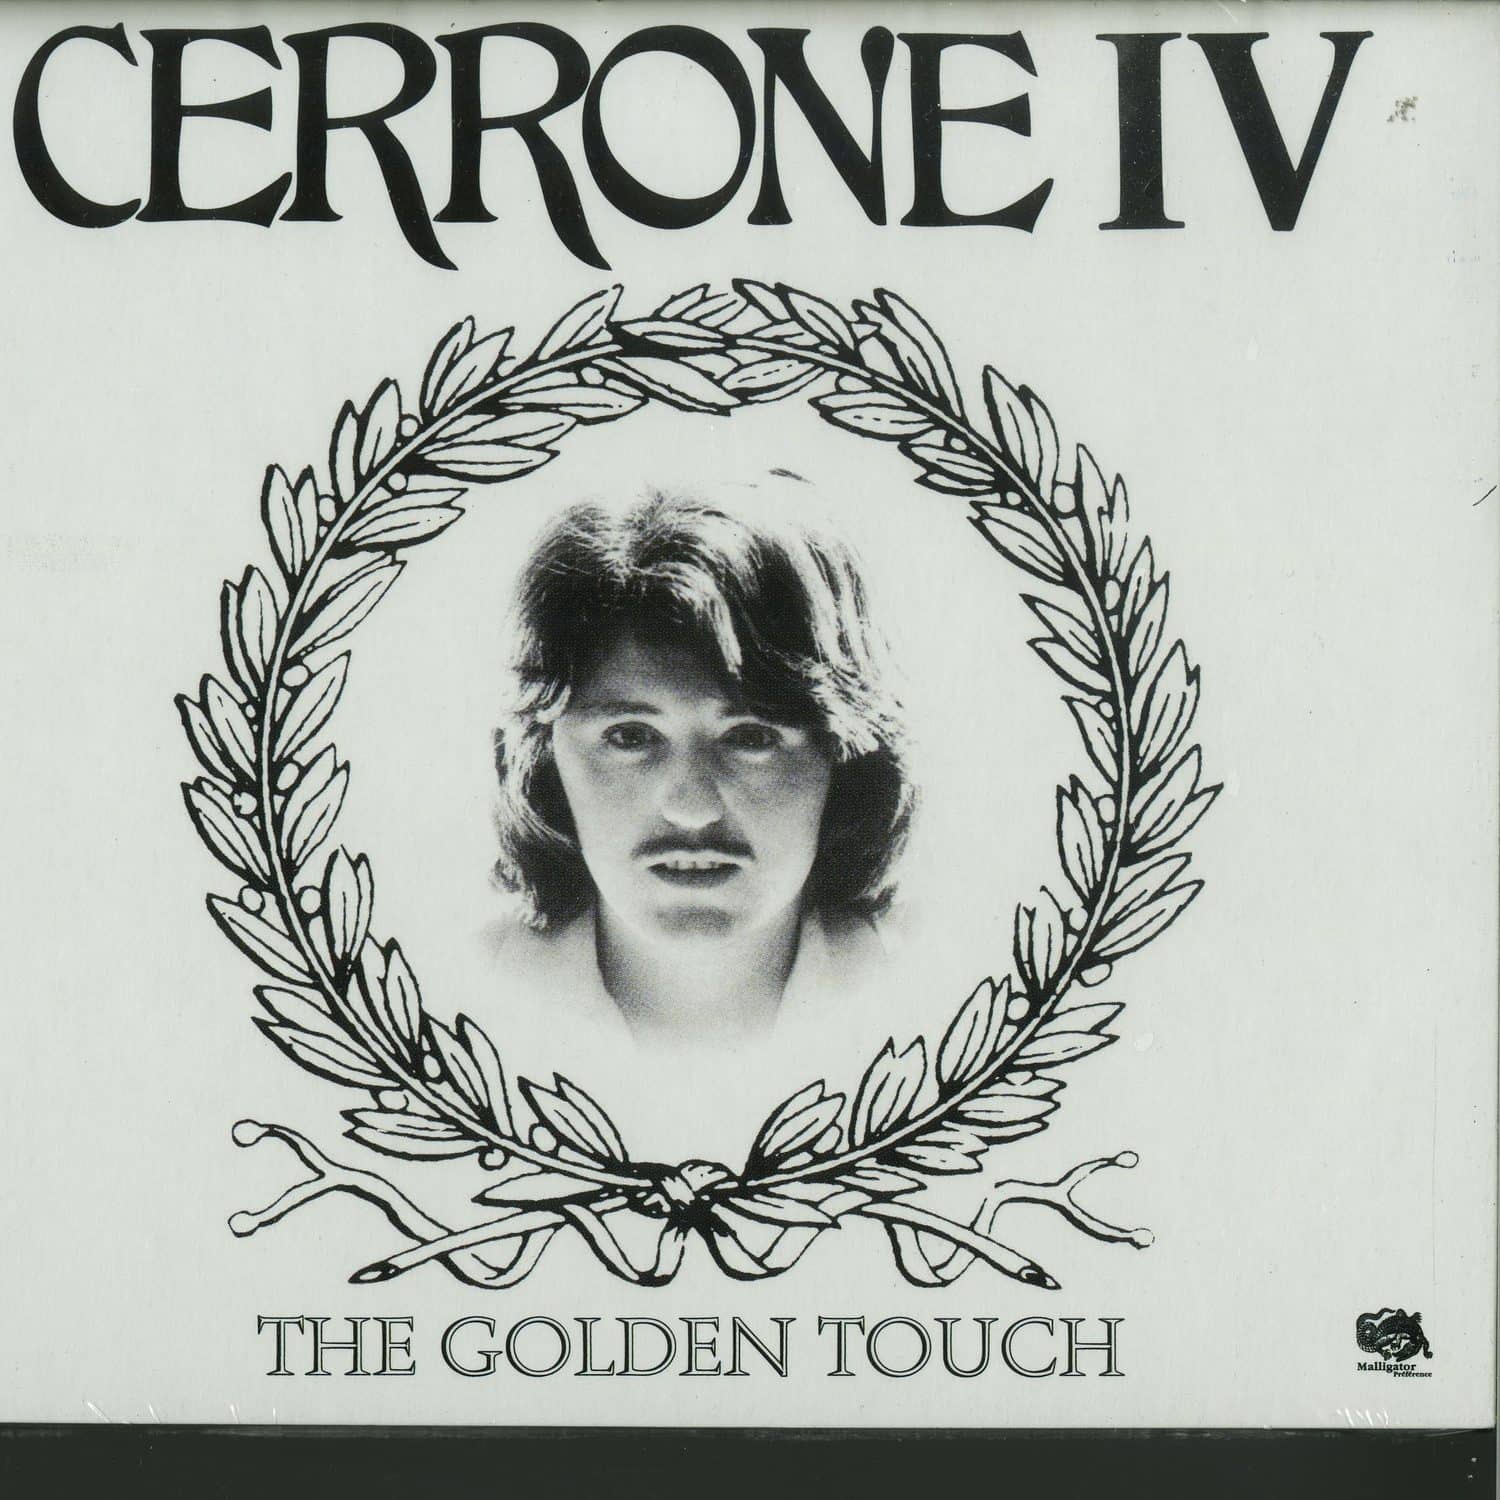 Cerrone - CERRONE IV THE GOLDEN TOUCH - THE OFFICAL 2014 EDITION 